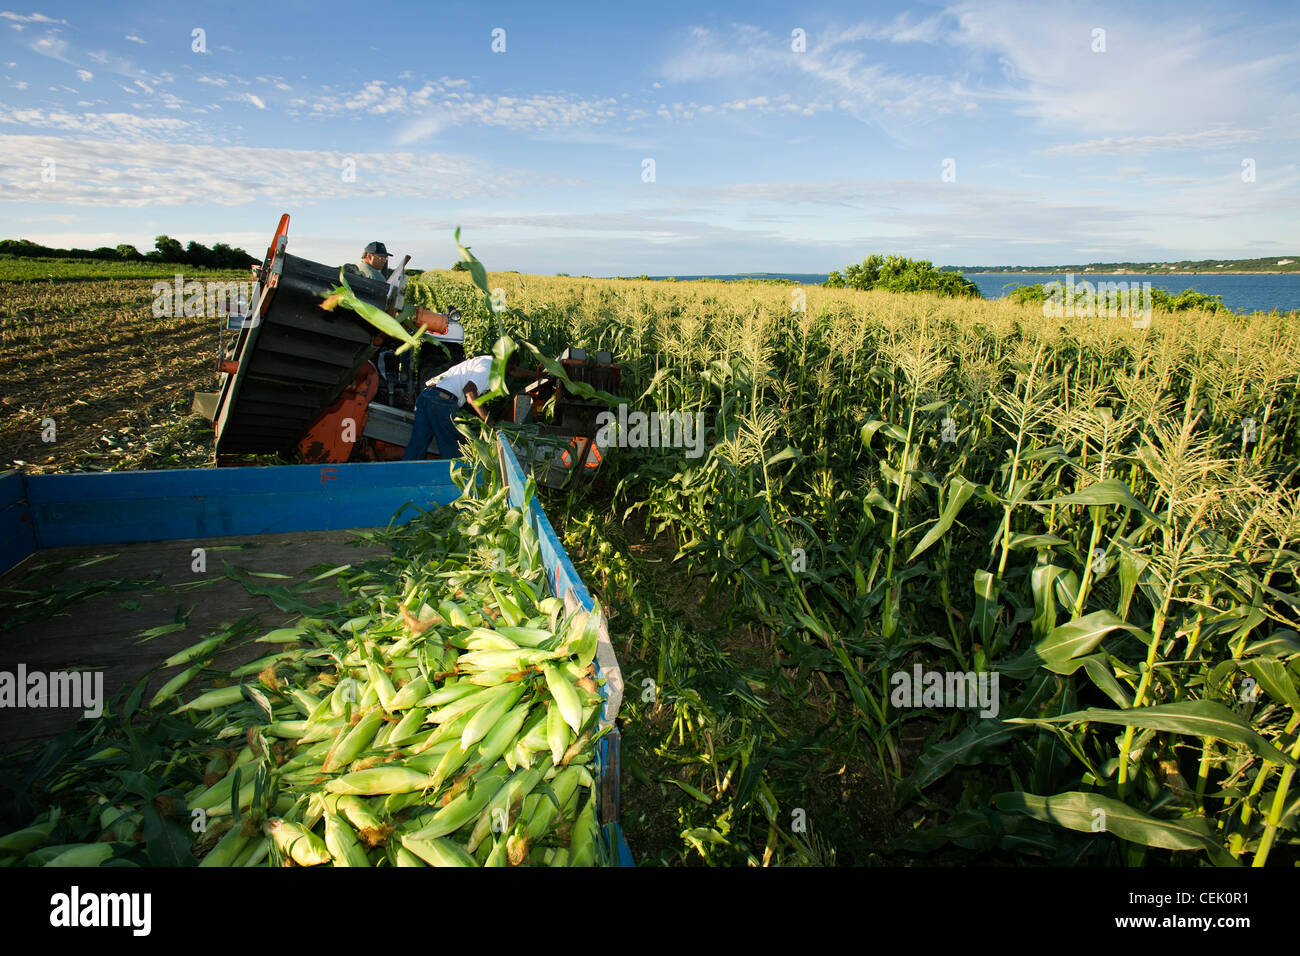 Harvesting sweet corn in mid Summer at a local family produce farm with the Sakkonnet River in the background / Rhode Island,USA Stock Photo